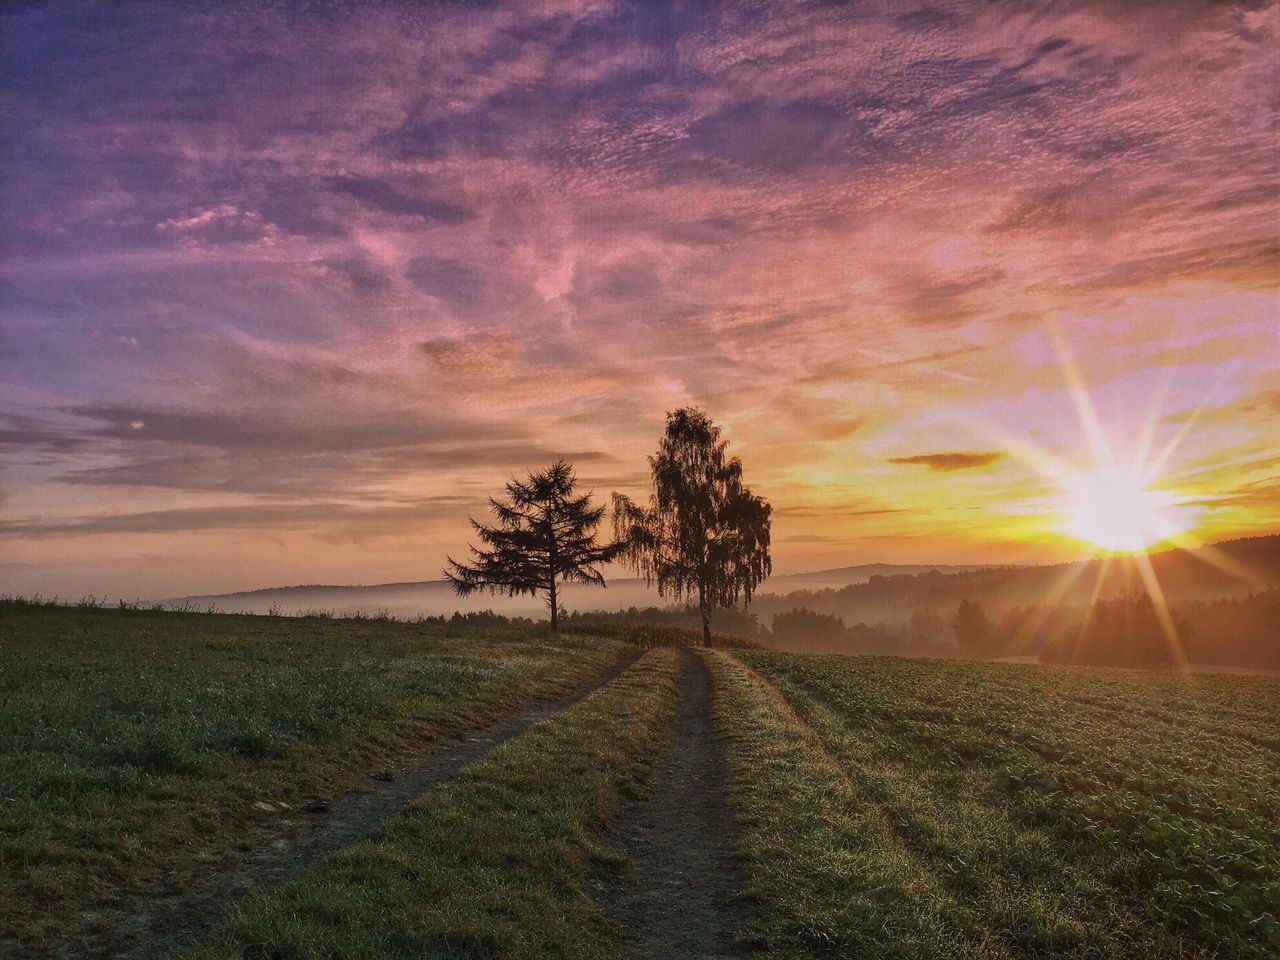 sunset, sun, landscape, tranquil scene, tree, scenics, beauty in nature, tranquility, agriculture, field, sunlight, rural scene, nature, orange color, dirt road, sky, growth, sunbeam, farm, cloud - sky, lens flare, plantation, remote, outdoors, no people, non-urban scene, solitude, countryside, horizon over land, cultivated land, majestic